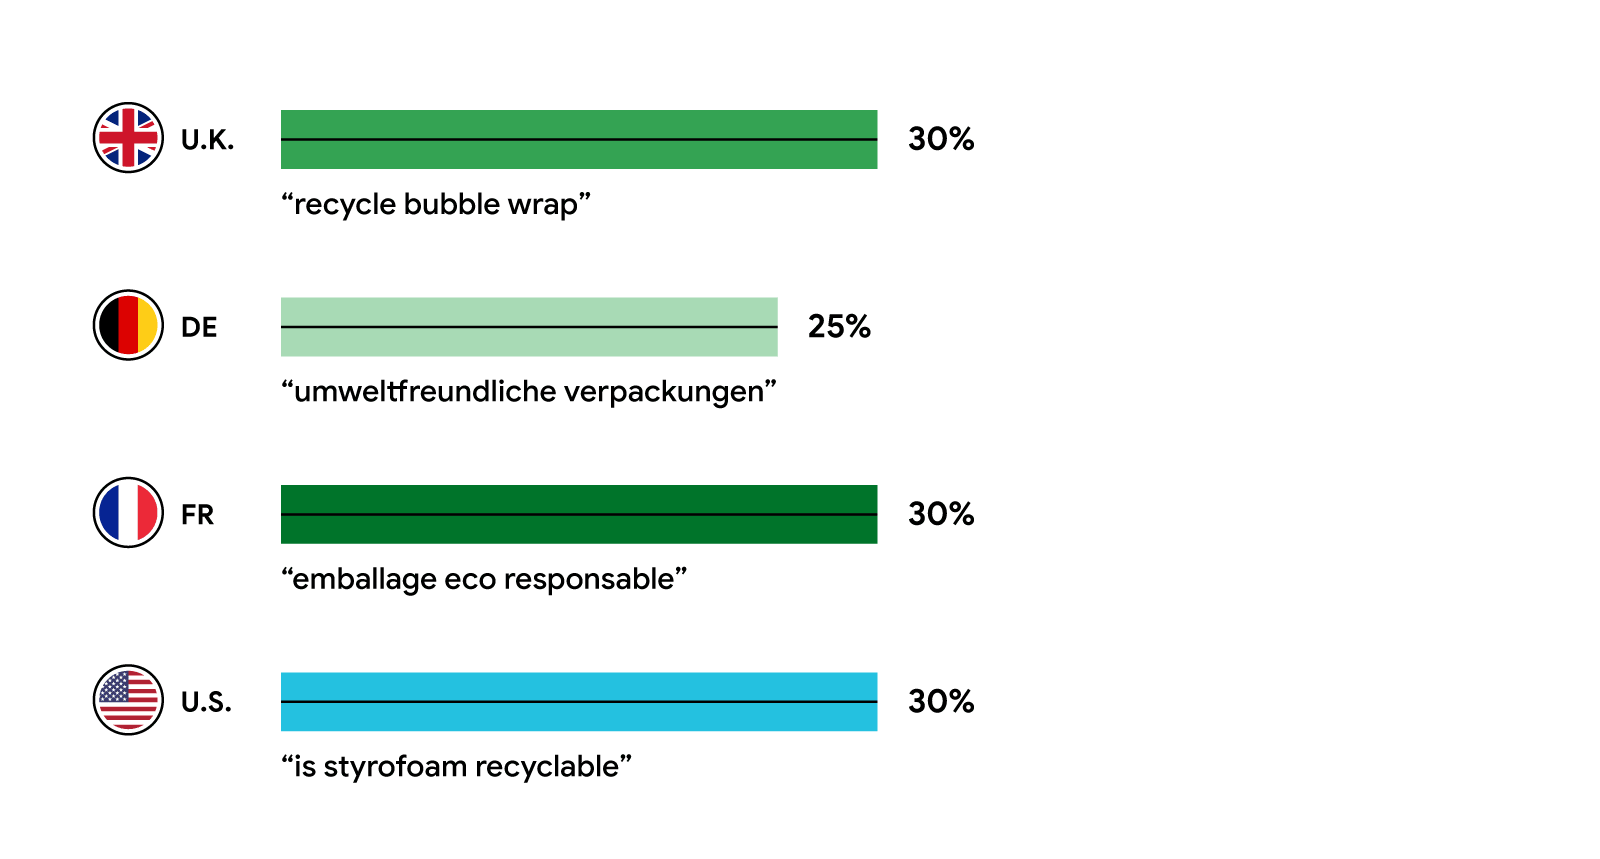 A bar chart shows the search interest in package recycling by country. U.K.: “recycle bubble wrap” – 30%; DE: “umweltfreundliche verpackungen” – 25%; FR: “emballage eco responsable” – 30%; U.S.: “is styrofoam recyclable” – 30%